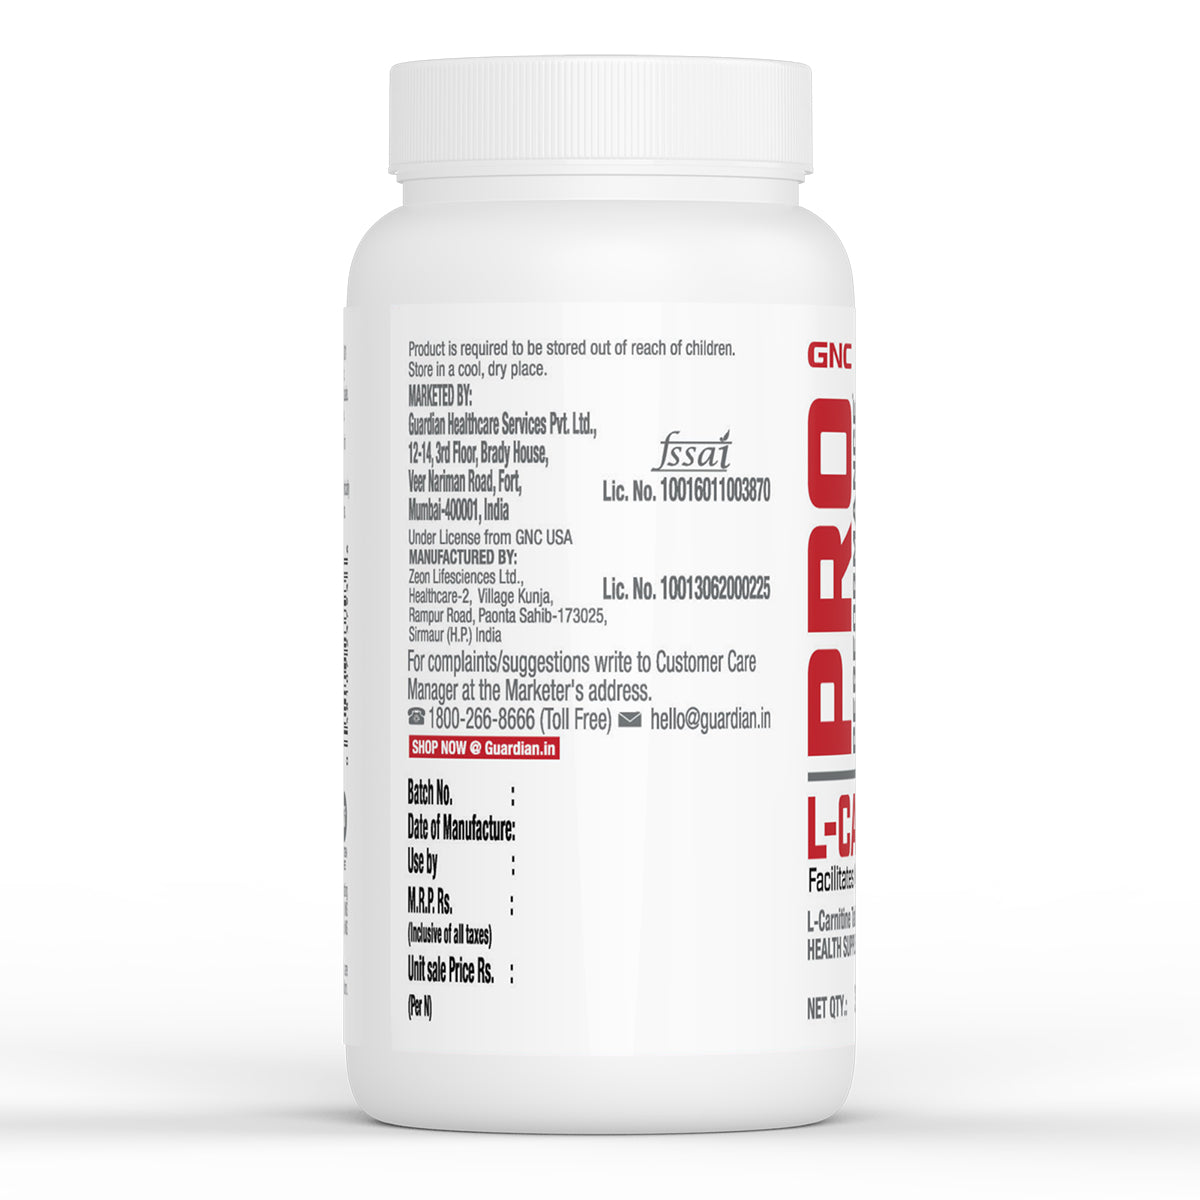 GNC Pro Performance L-Carnitine Tablets 500mg - Burns Fat for Instant Energy & Extreme Performance